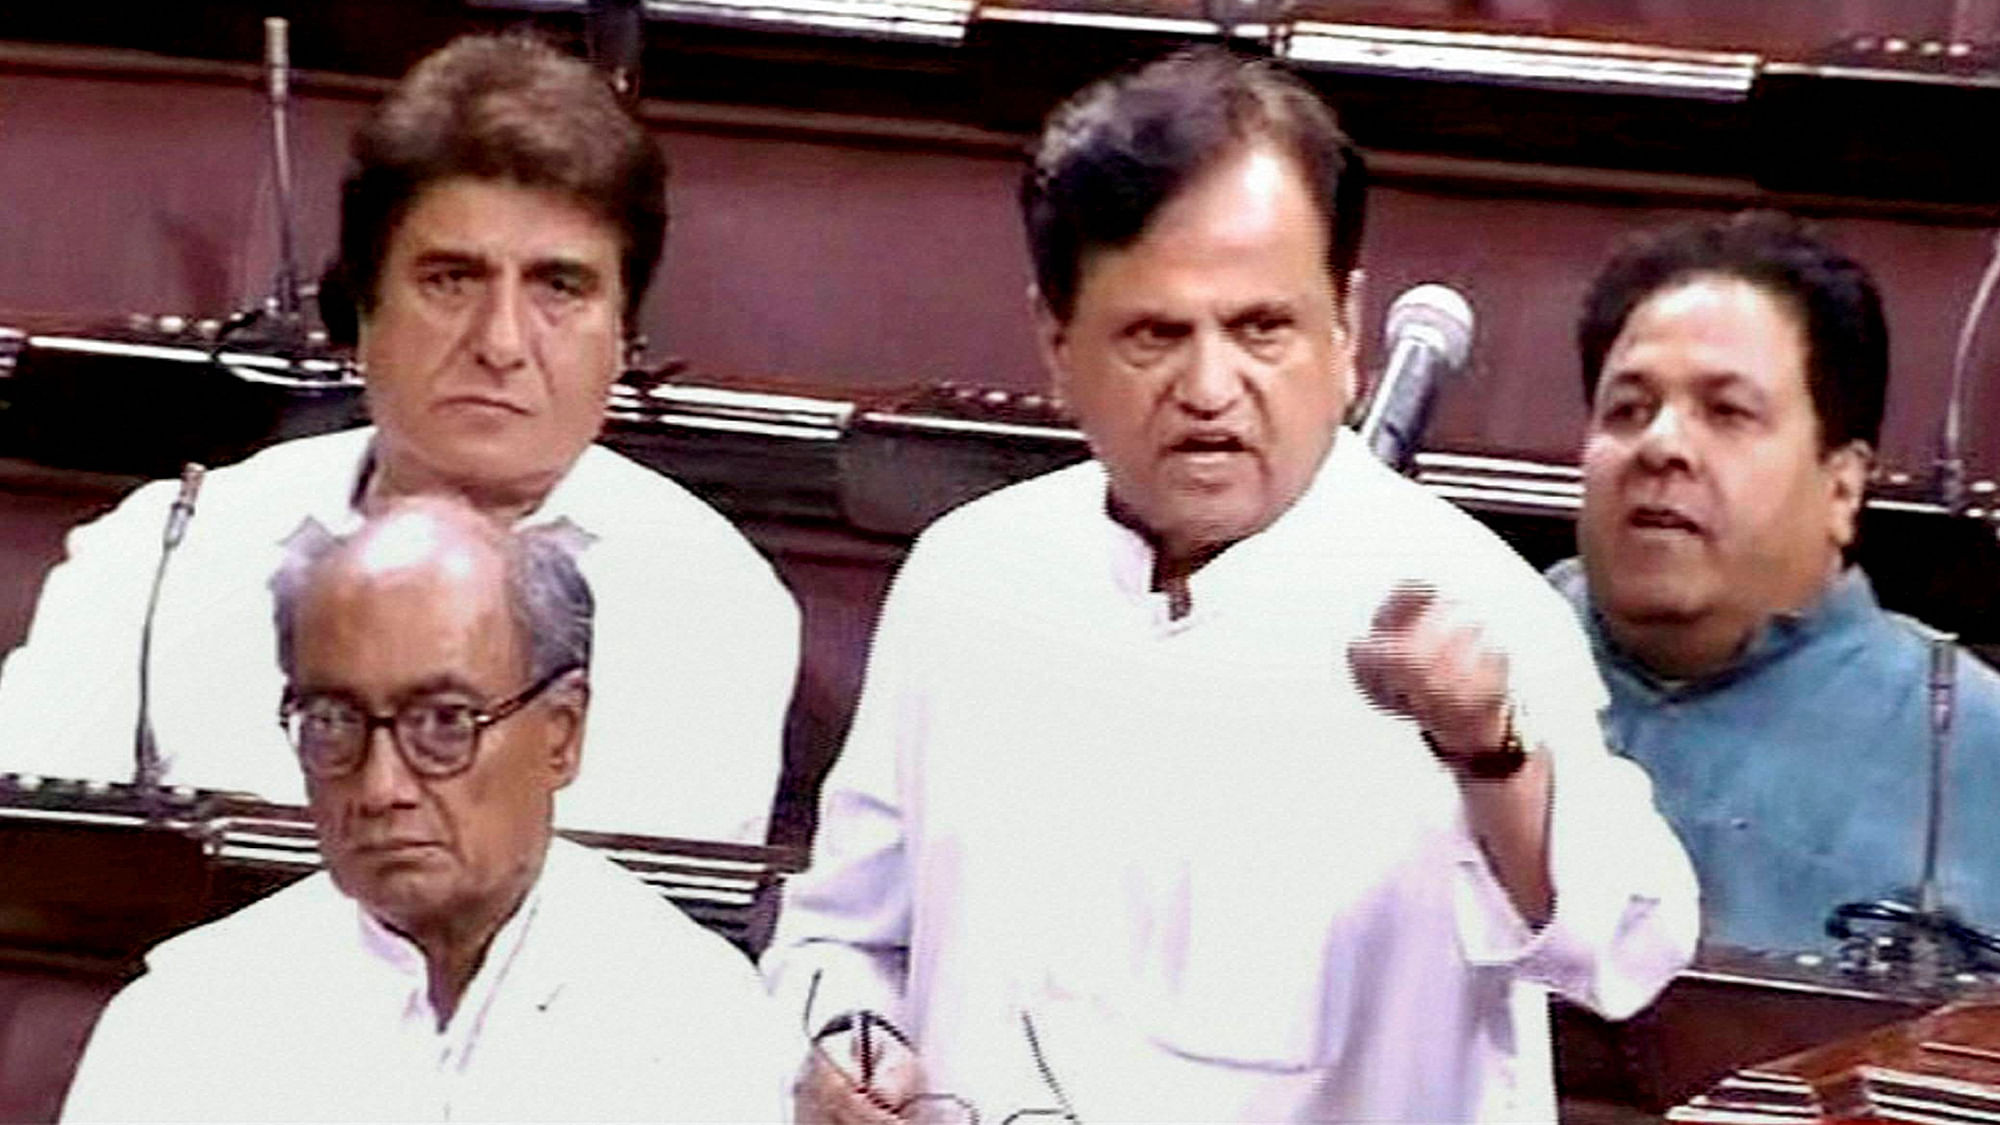 <div class="paragraphs"><p>Congress rebutting the charges levied against the late Ahmed Patel by Gujarat SIT probing Conspiracies and charges of fabricating evidence in the 2002 Gujarat riots said this is 'vilification of a deceased person'.&nbsp;</p></div>